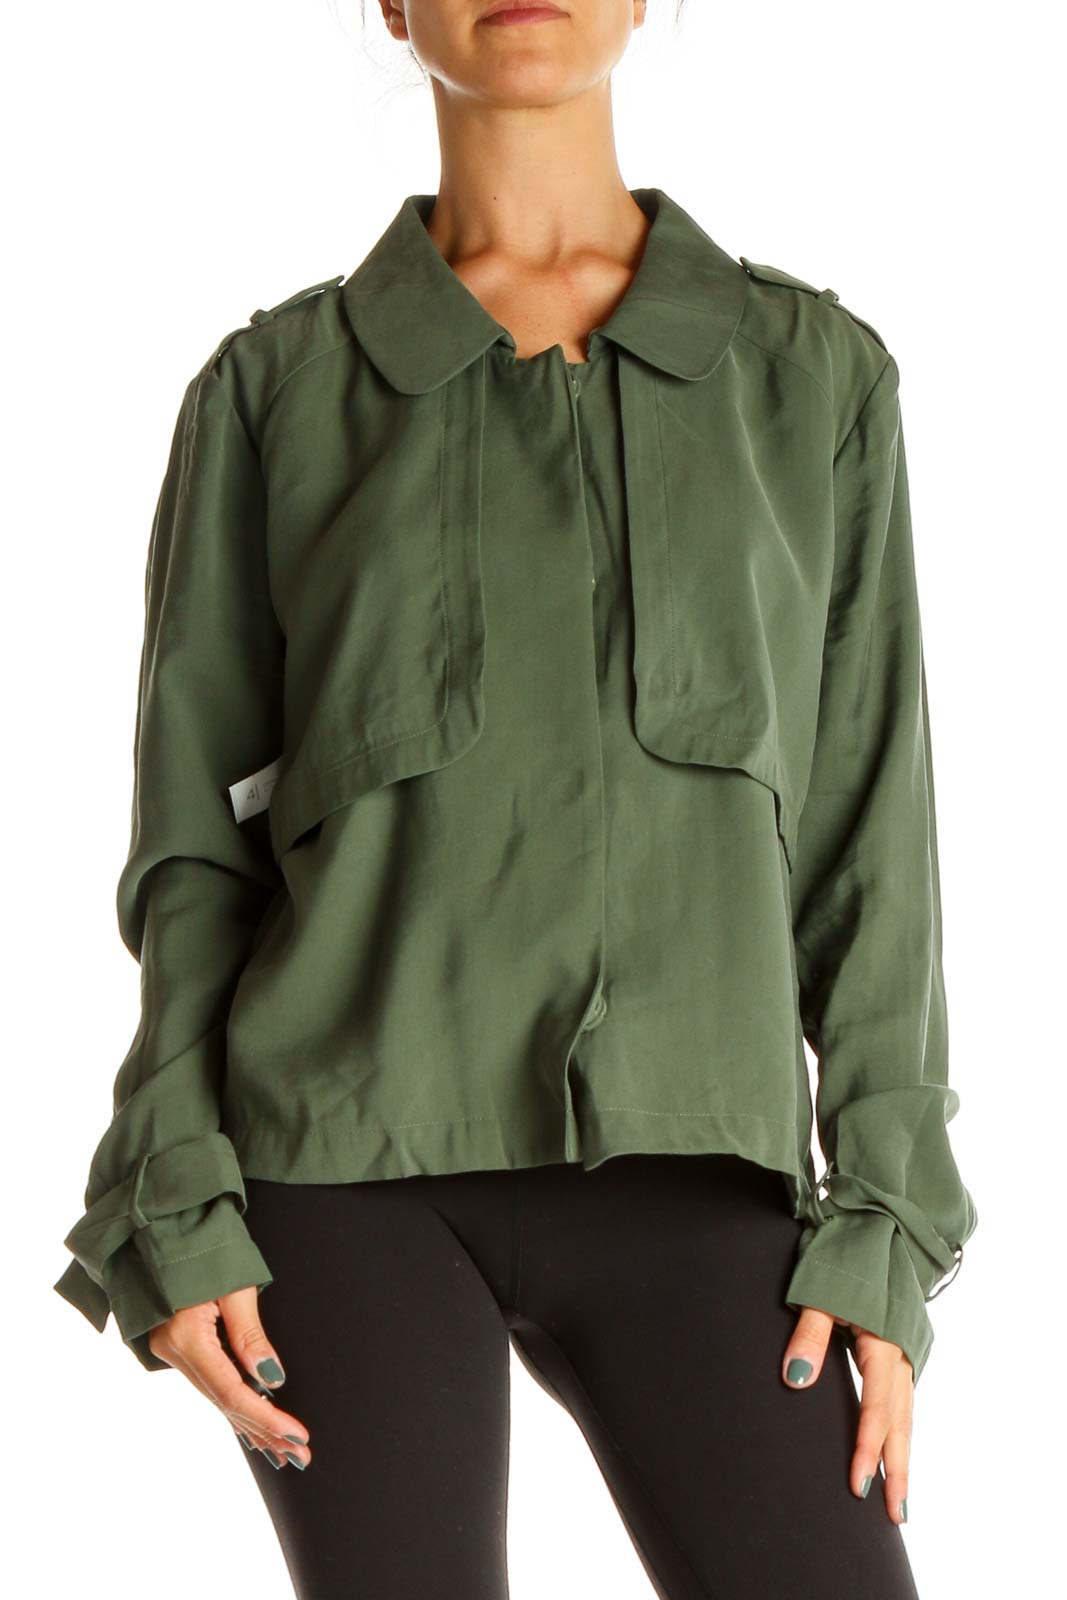 Green Jacket Front